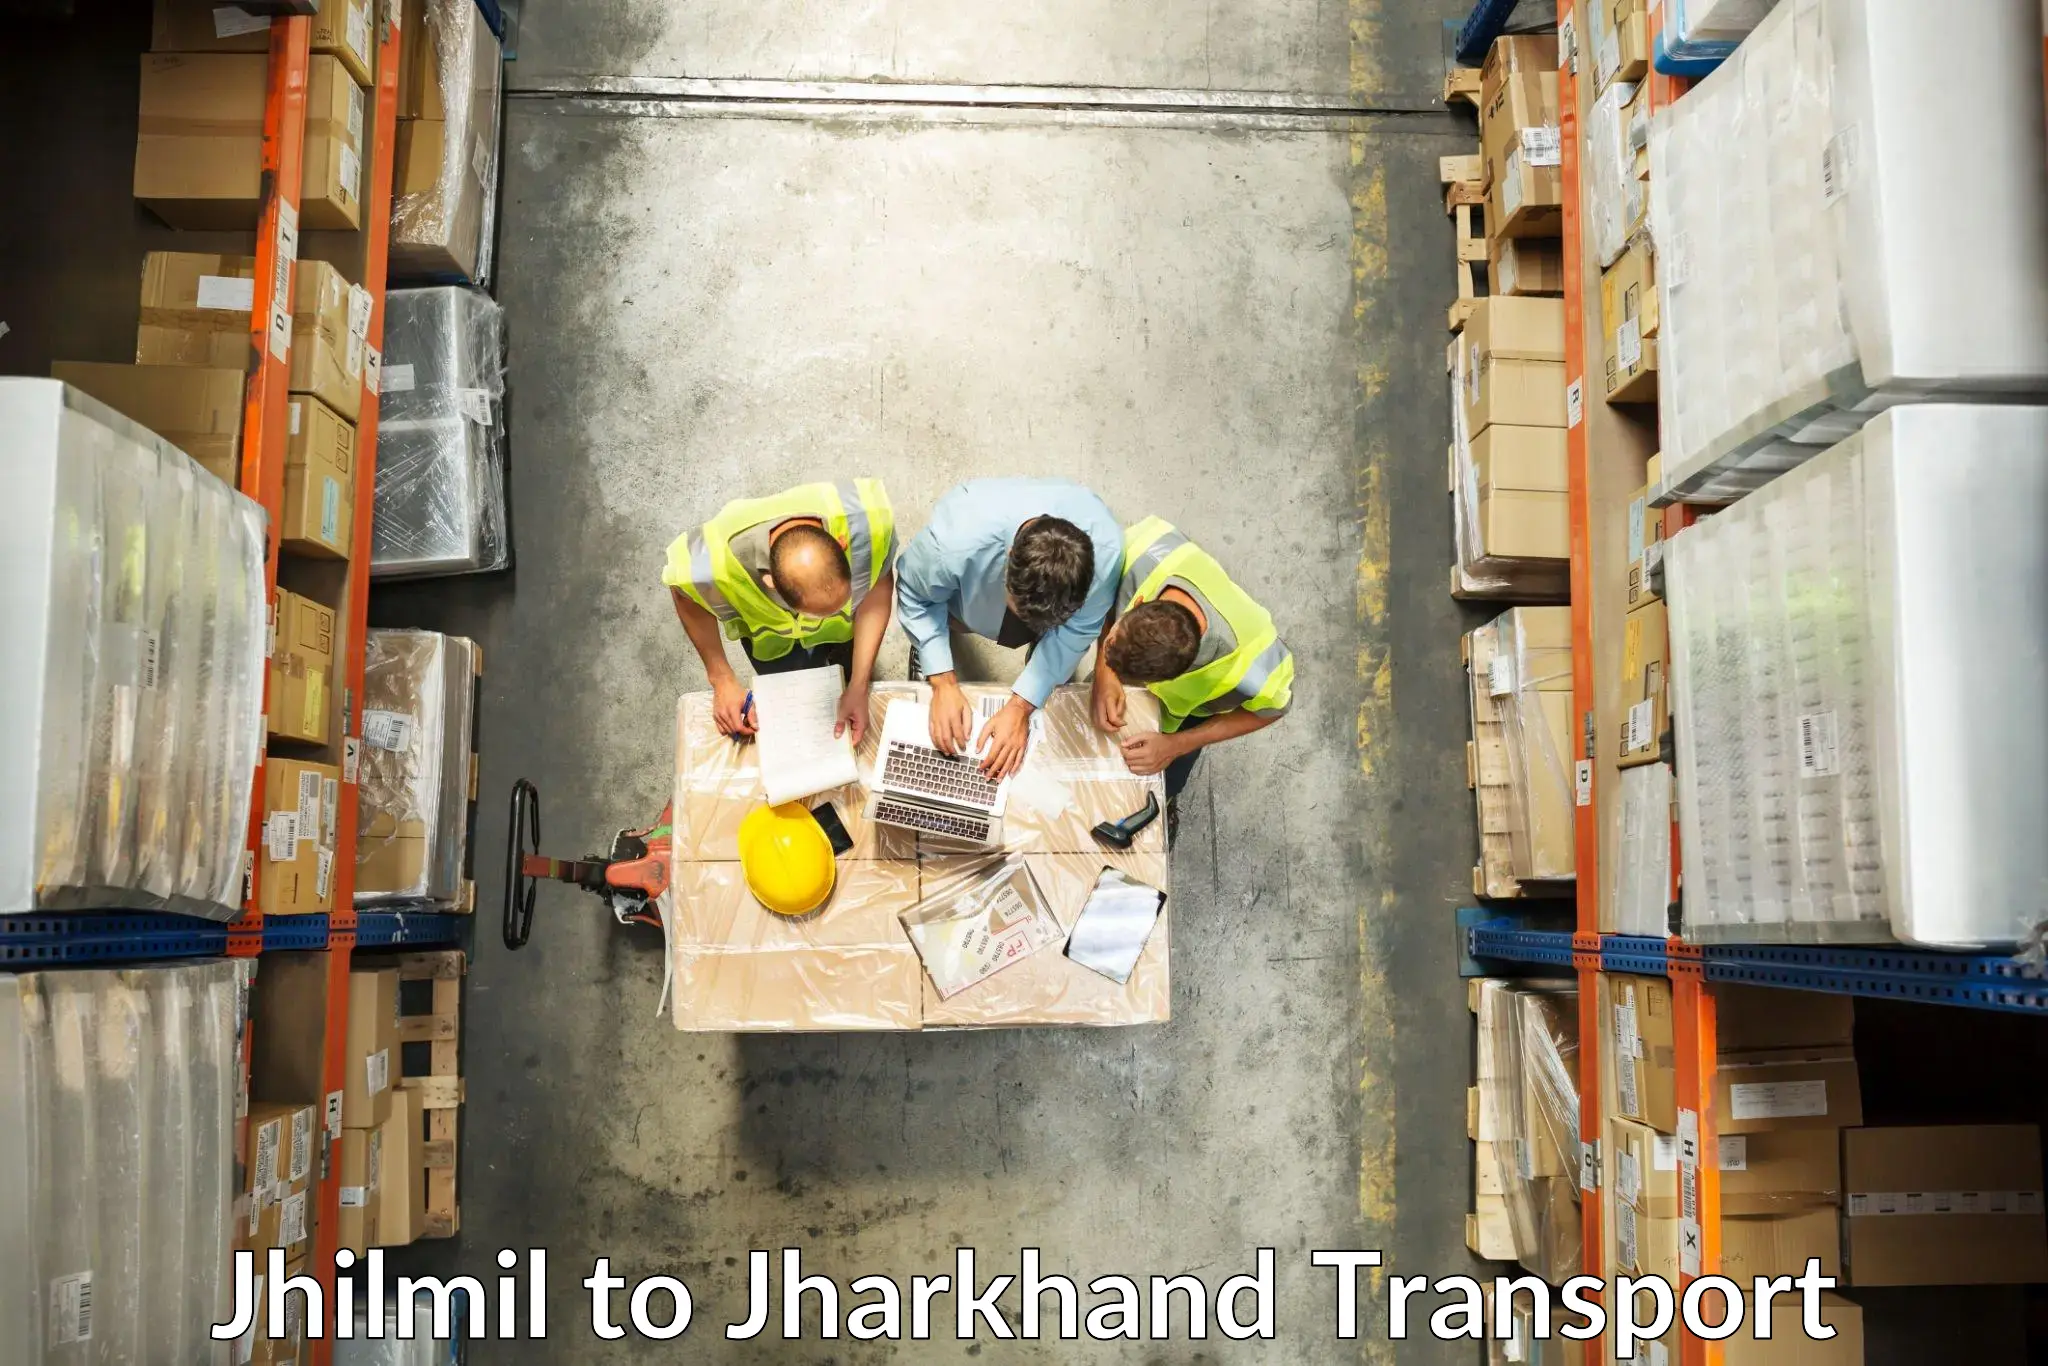 All India transport service Jhilmil to Tisri